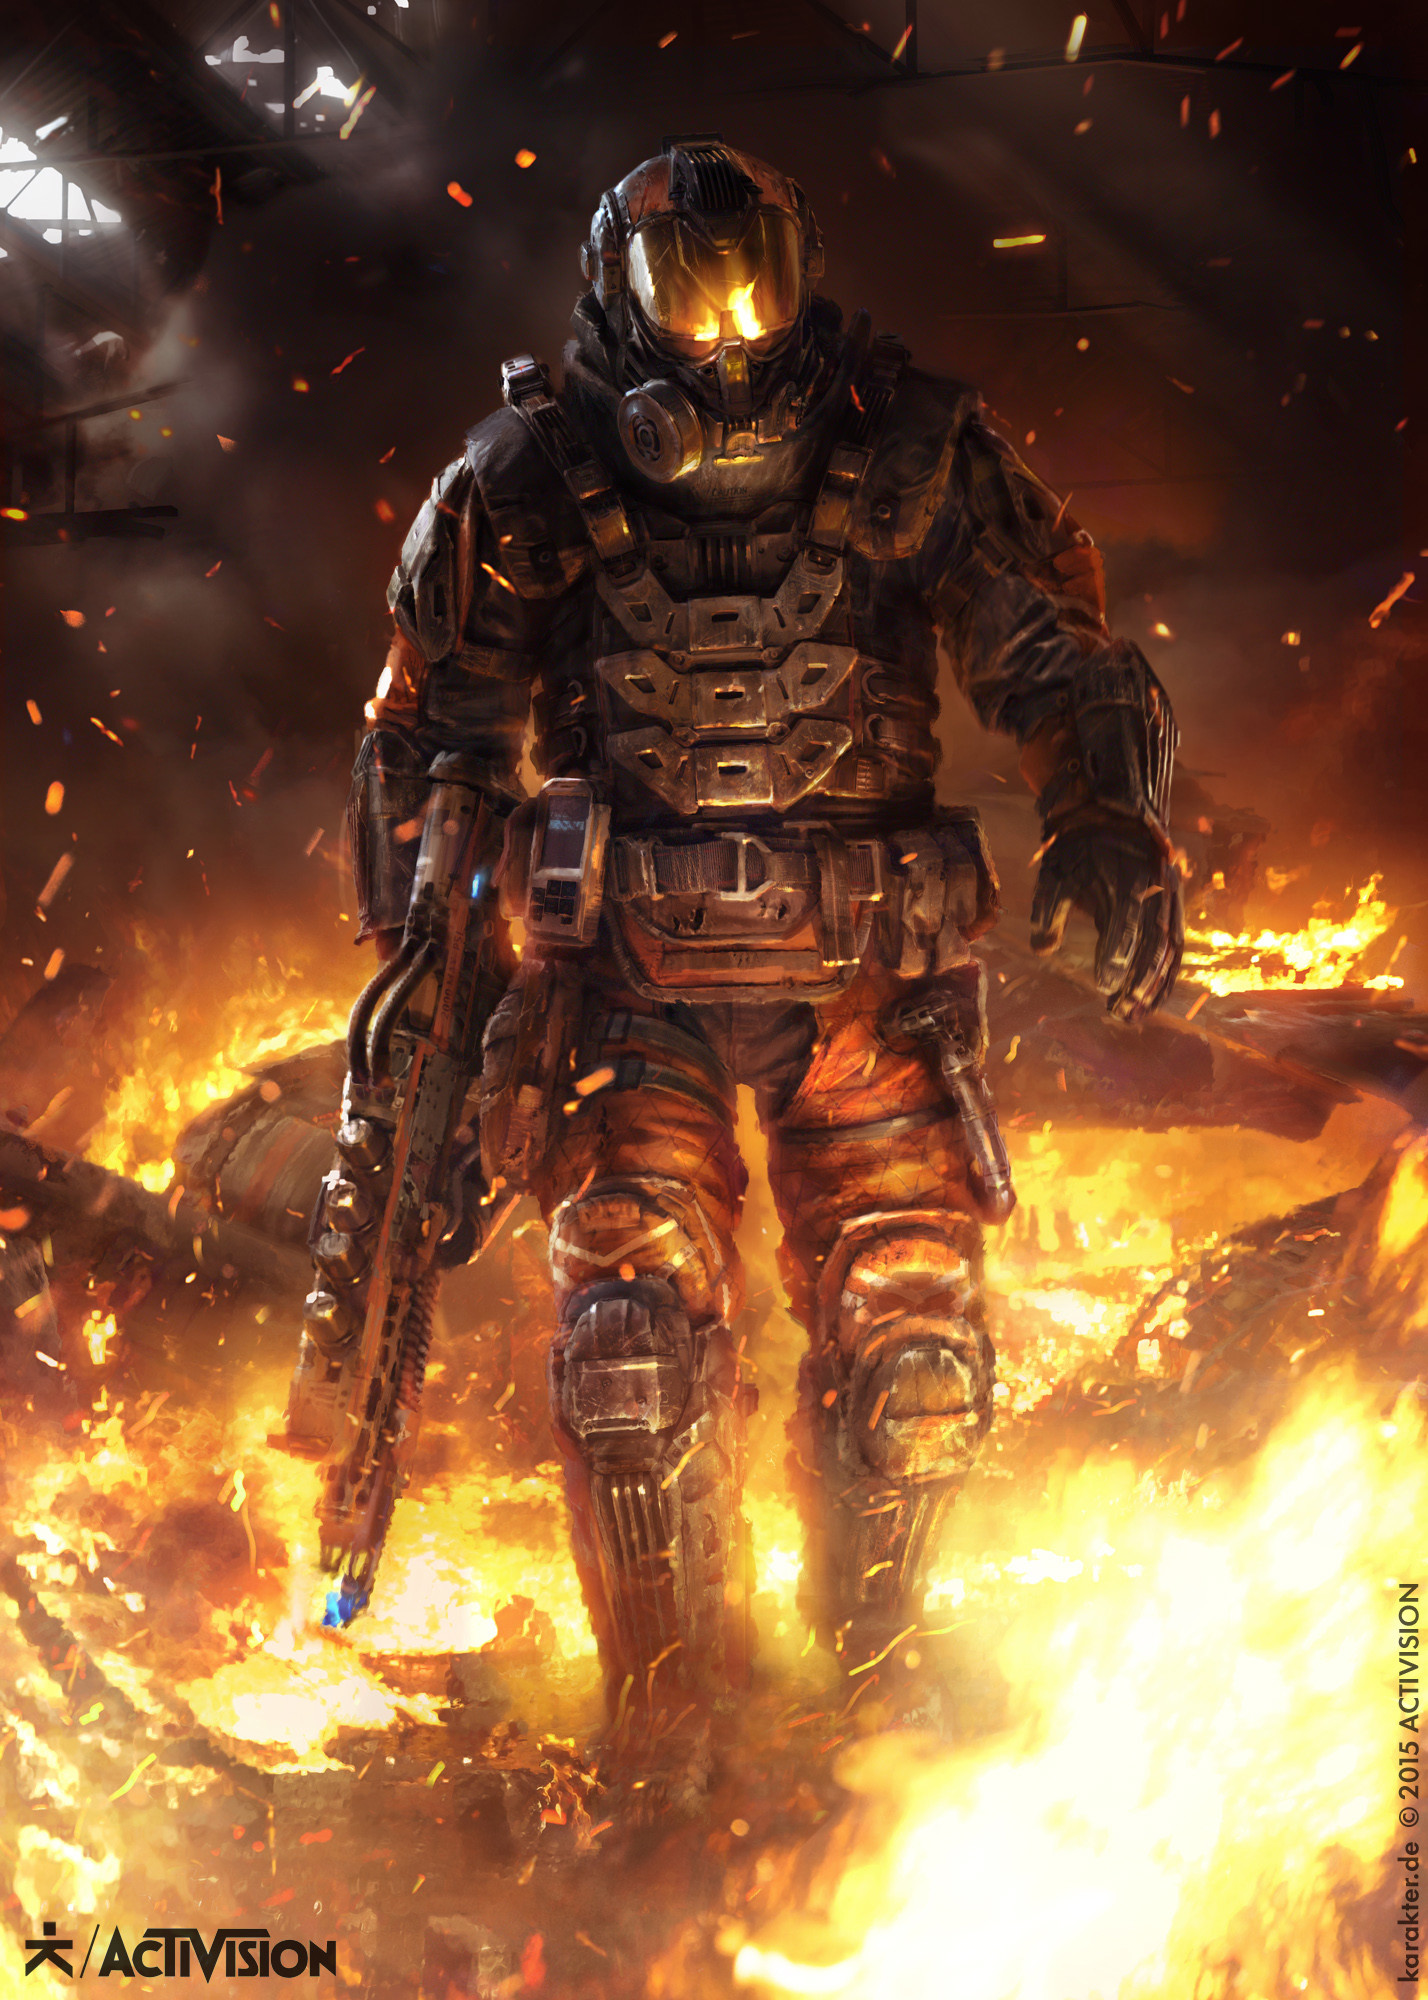 Flamethrower Helmet Fire Burning Call Of Duty Black Ops Iii Activision Video Games Video Game Charac 1428x2000